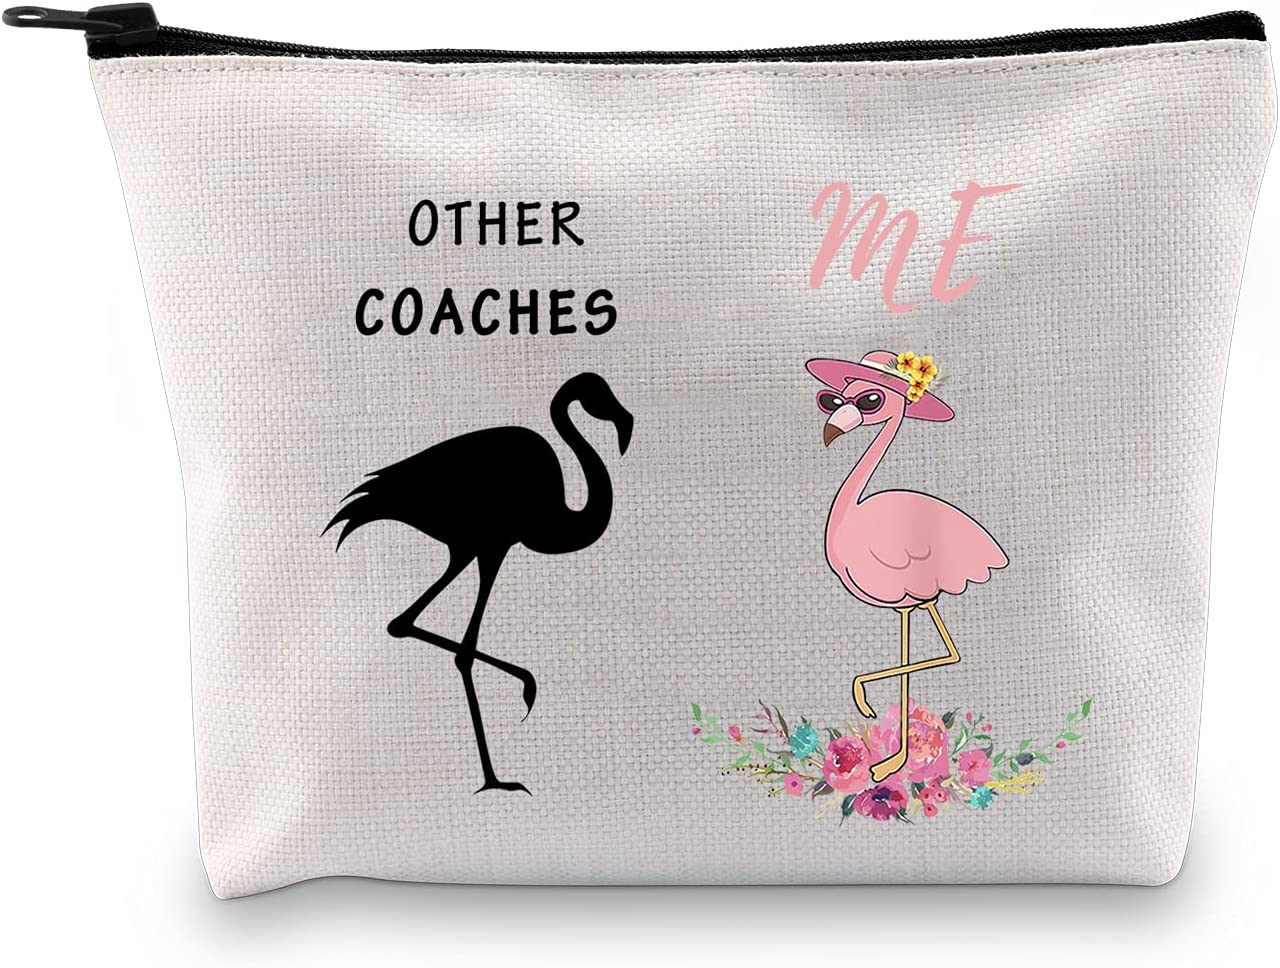 Coaches Gift for Women Other Coaches Me Football Baseball Cheer Coaches Zipper Pouch Cosmetic Makeup Bag Coaches Birthday Gift - image 1 of 5